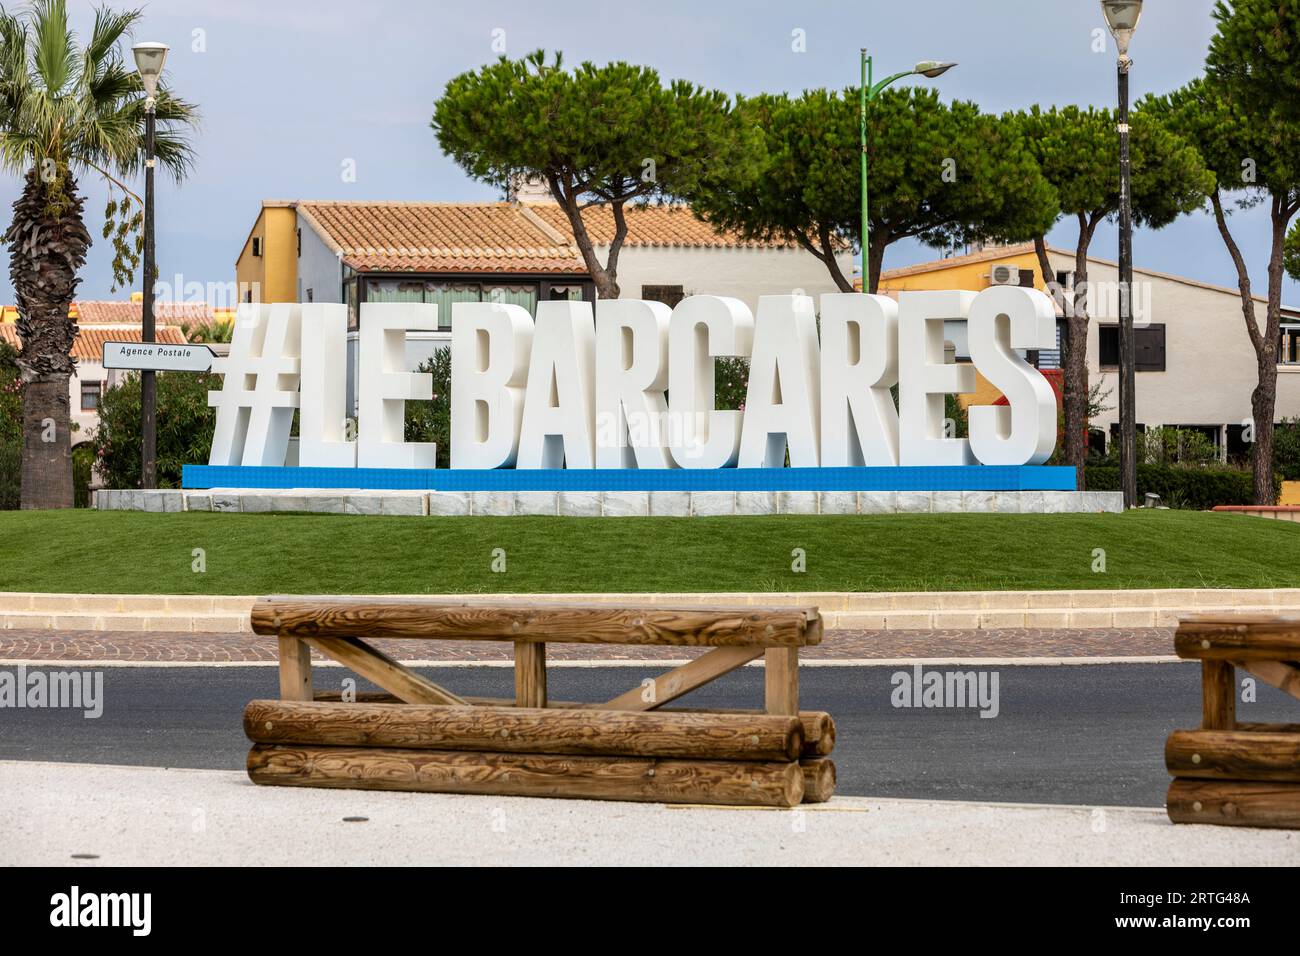 A large Le Barcares sign on a roundabout in Le Barcares, France Stock Photo